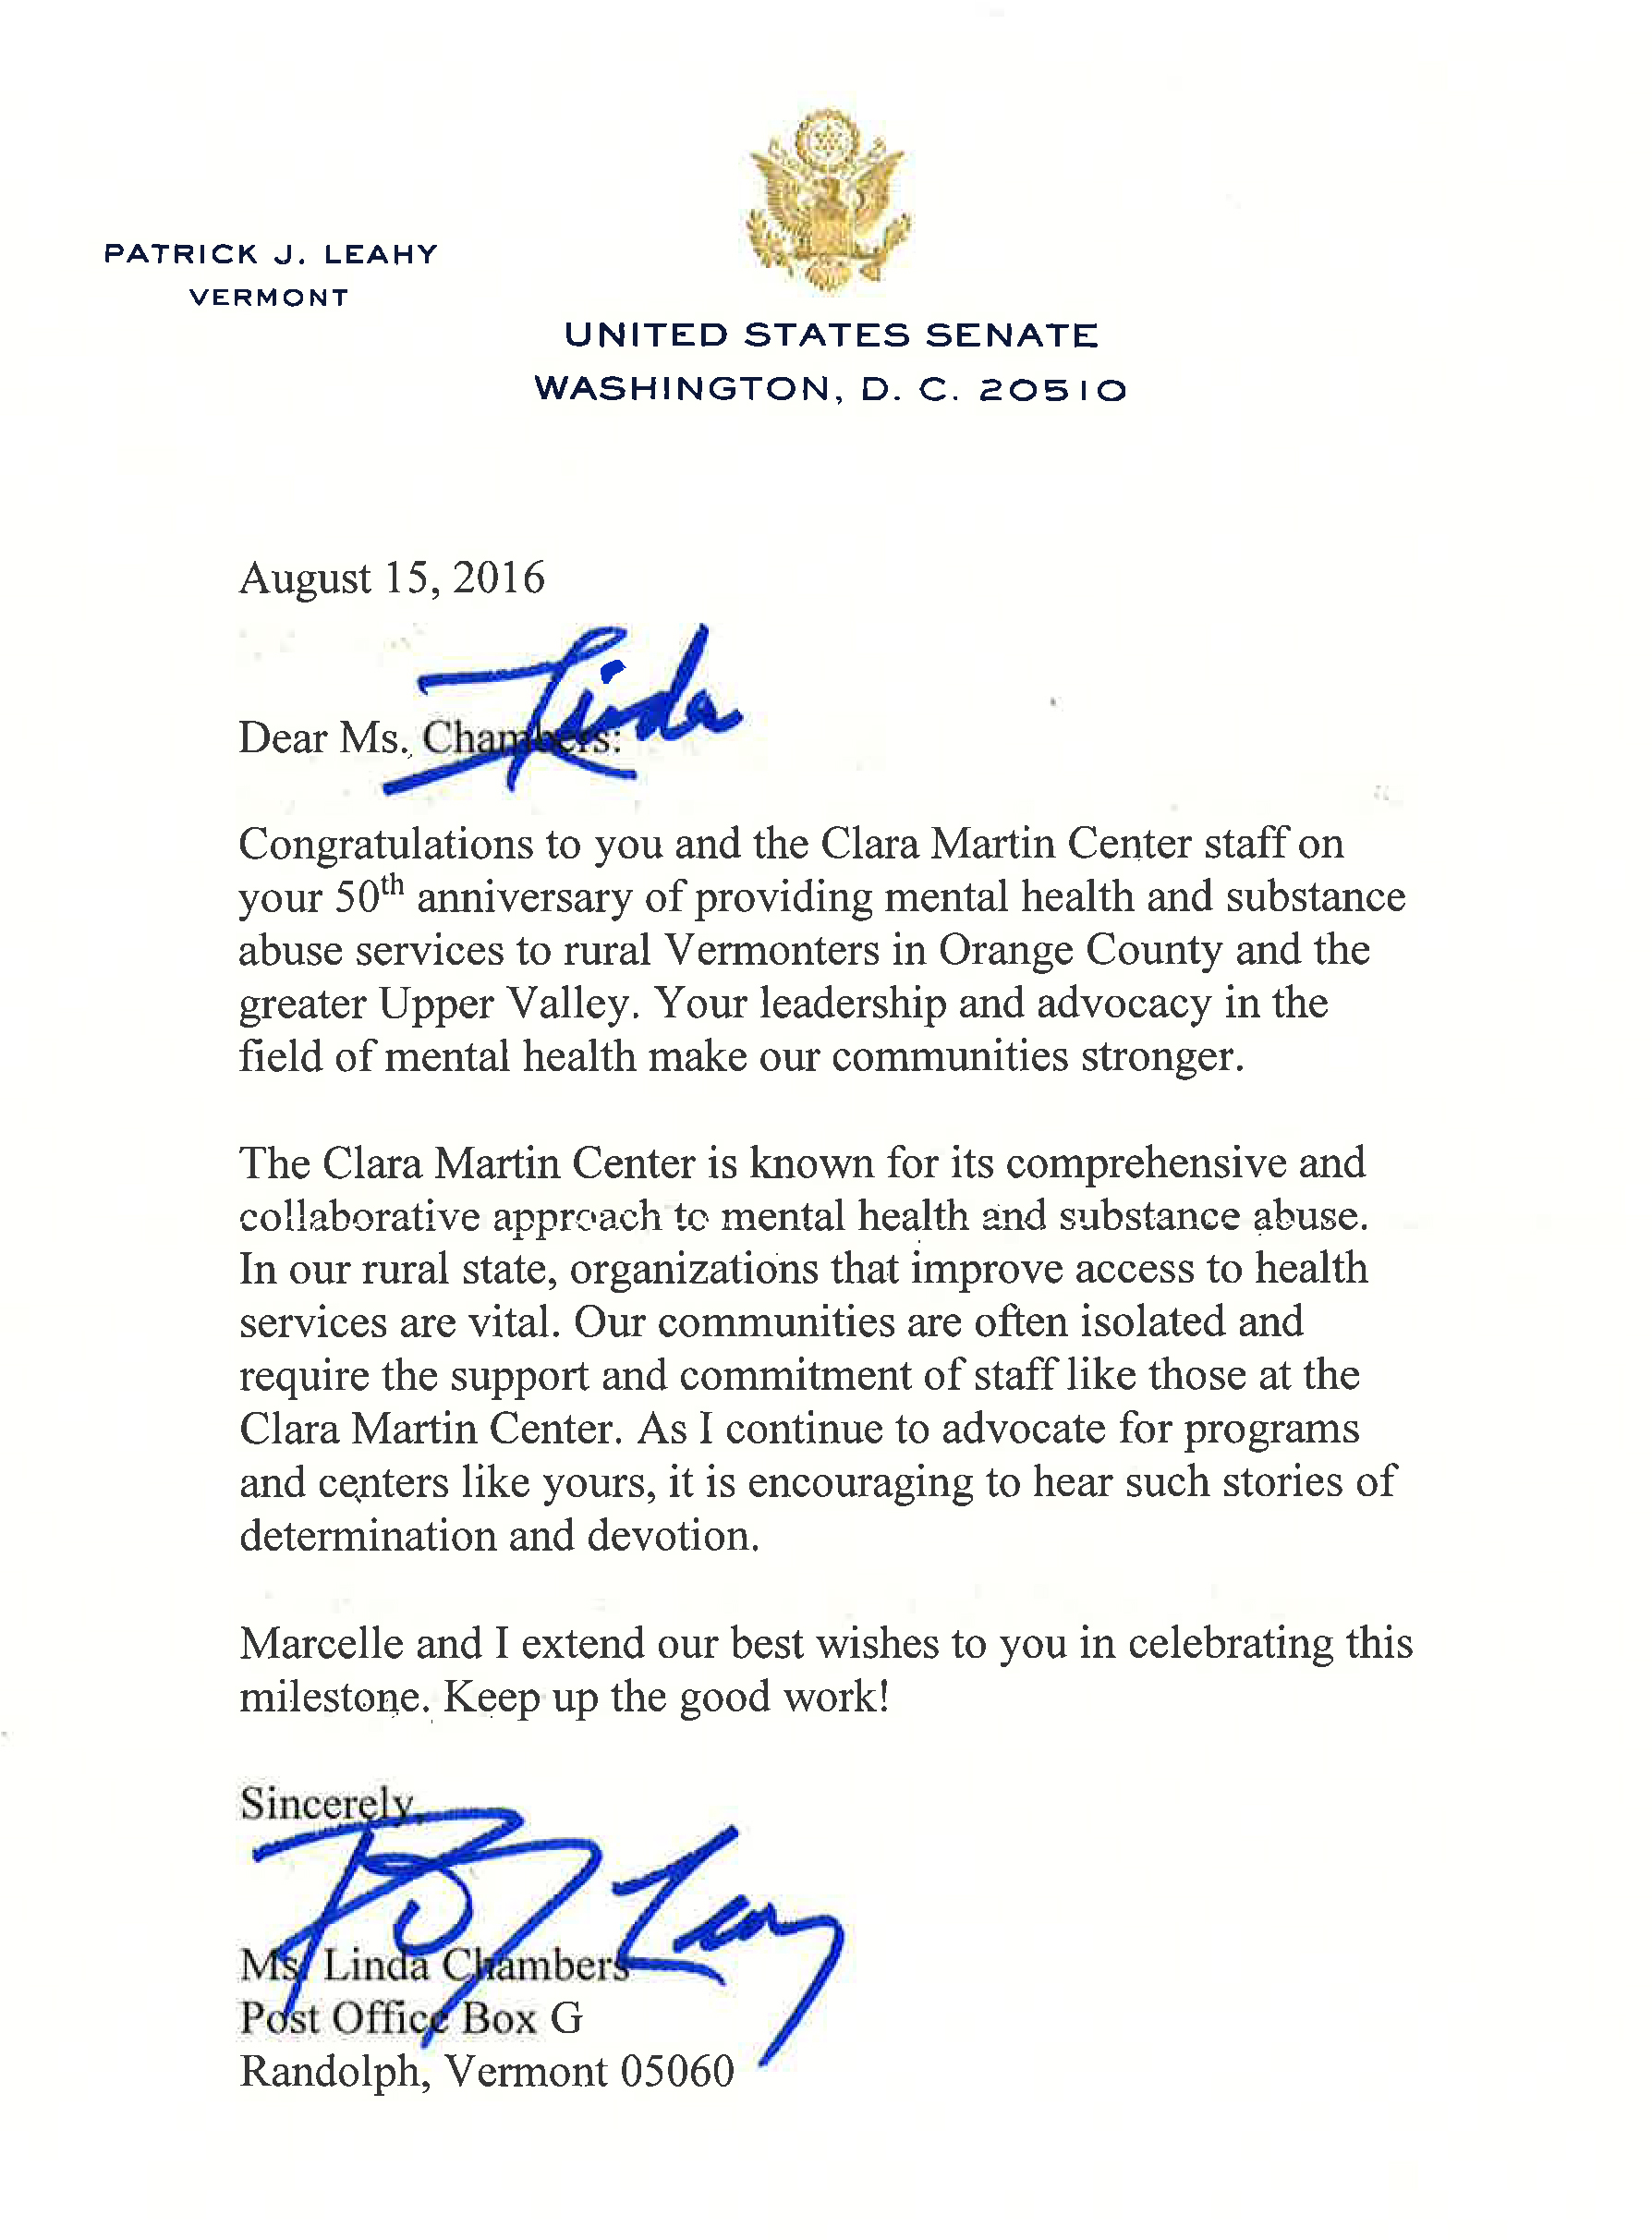 Letter from Senator Patrick Leahy to the Clara Martin Center on their 50th Anniversary